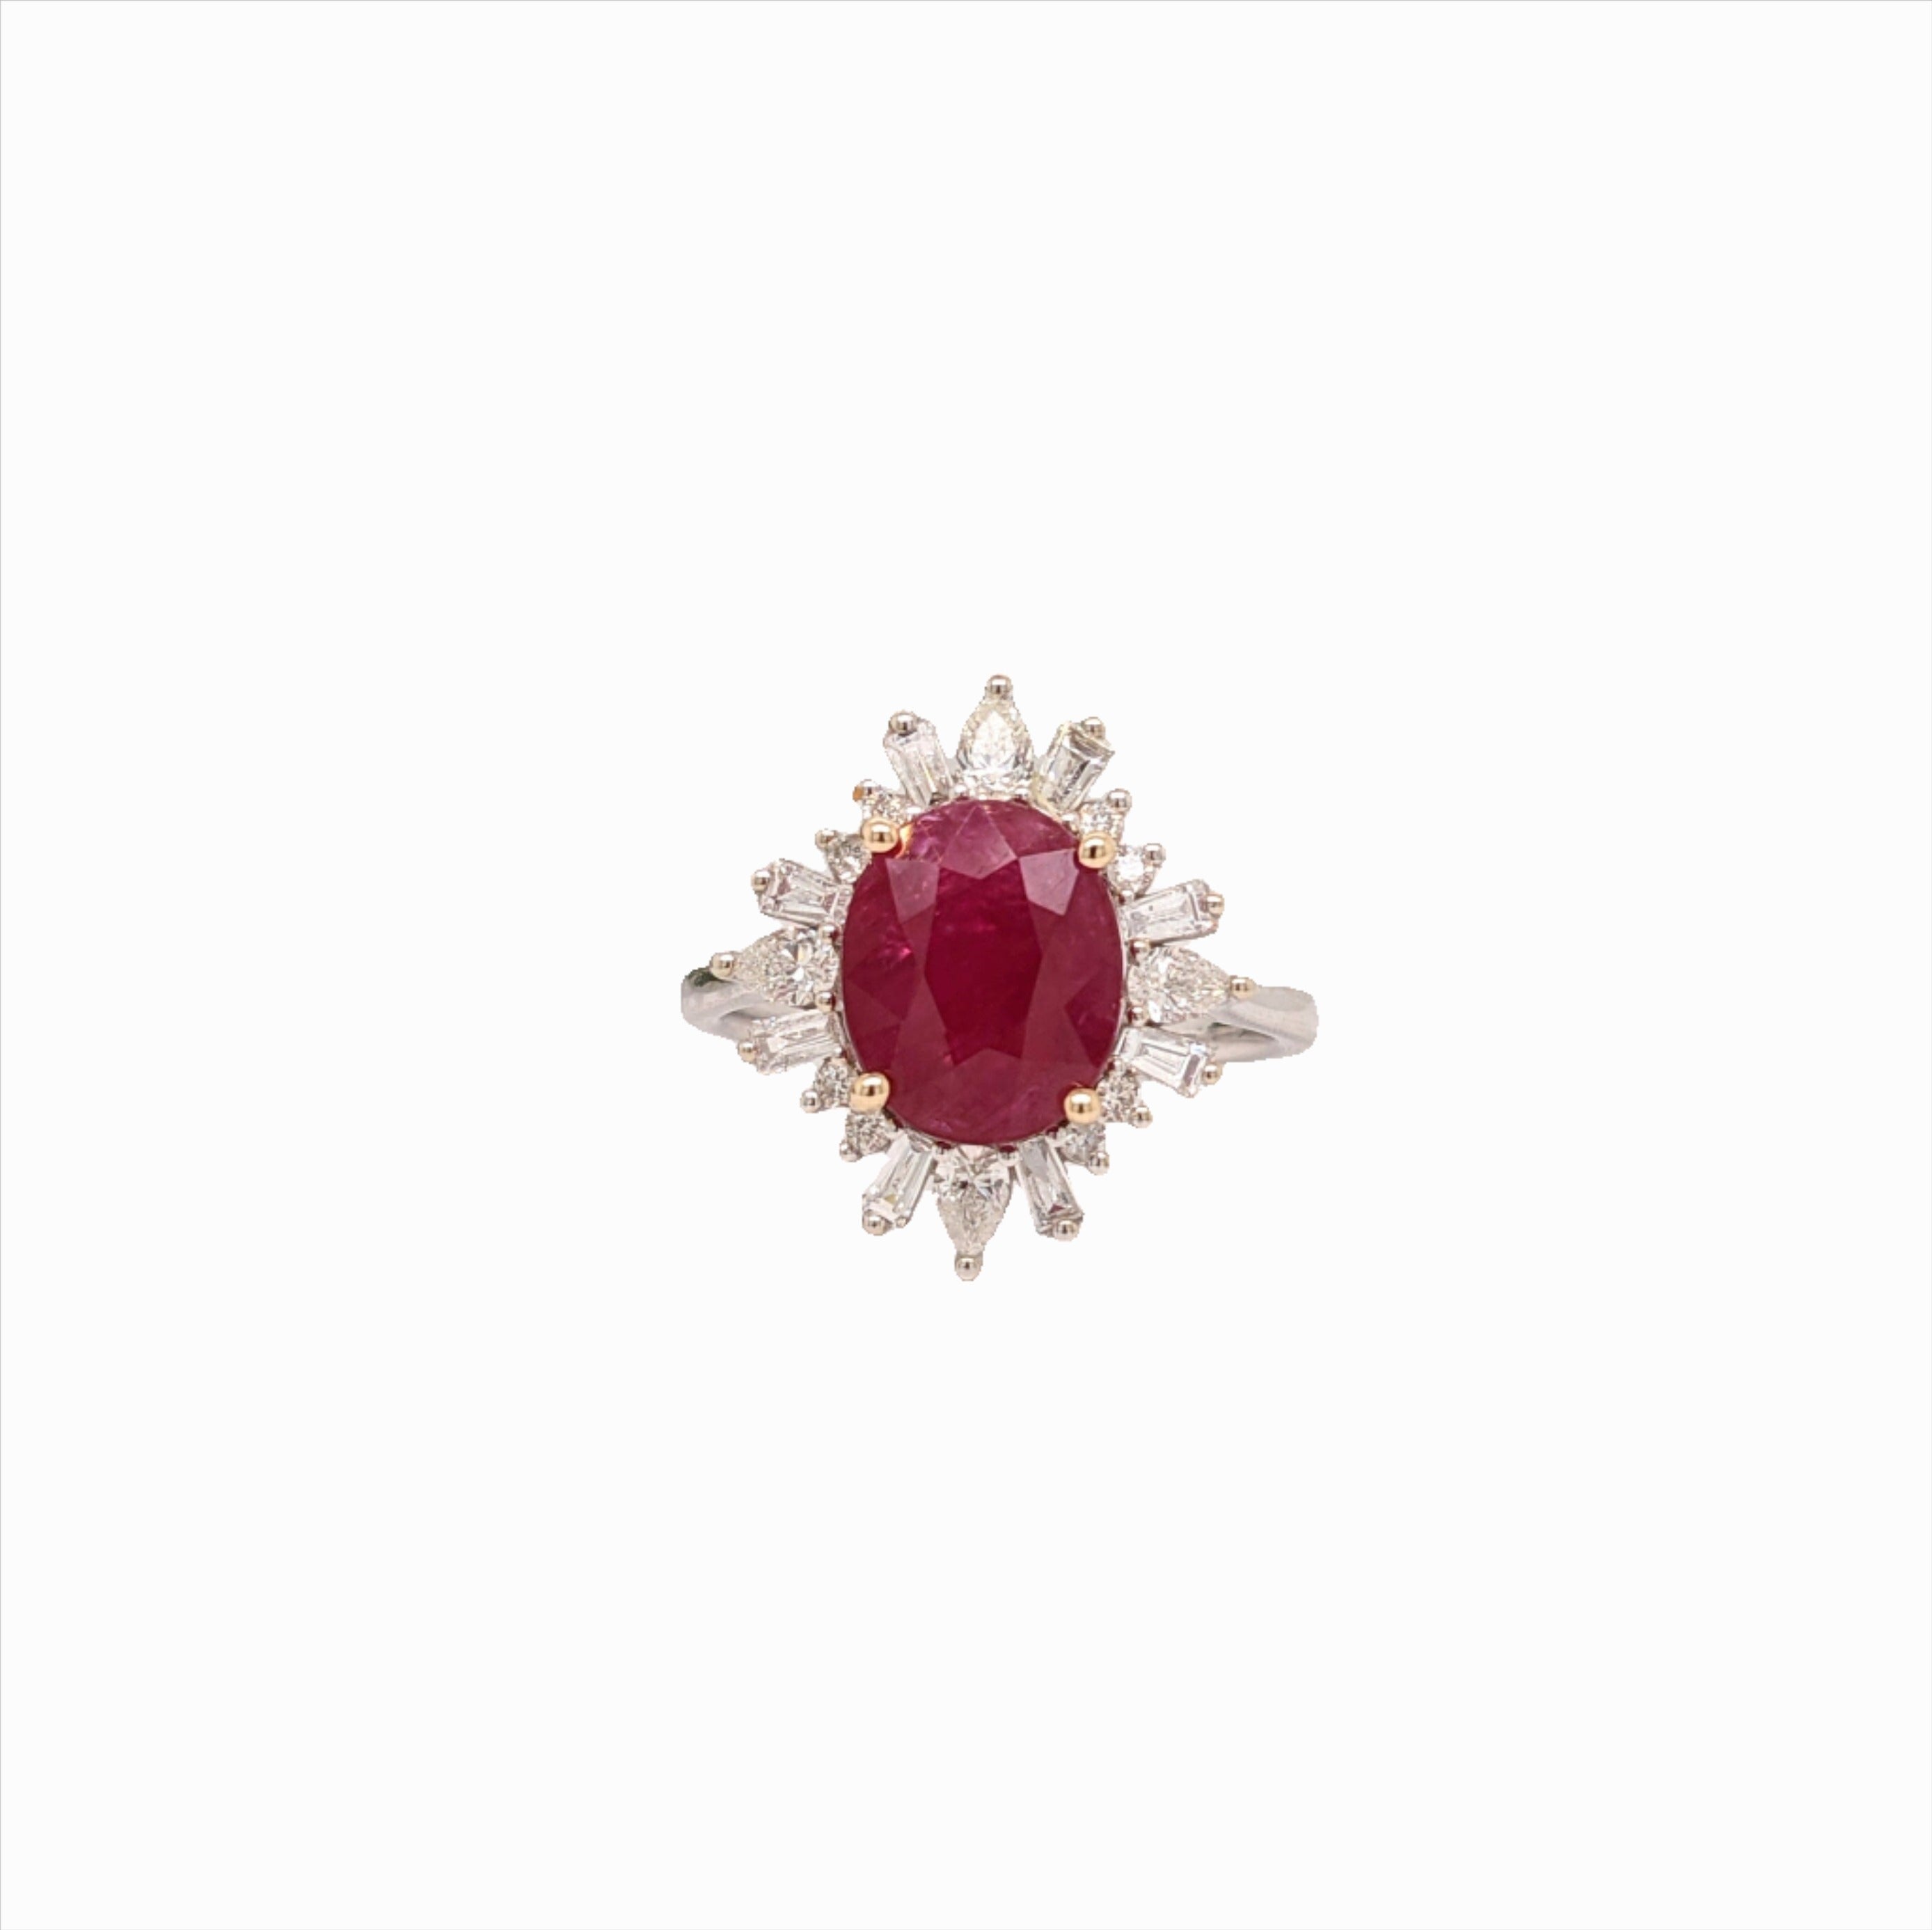 Bright Red Ruby Ring in Two Tone 14K Gold with Baguette Diamond Accents | Oval 10x8mm | July Birthstone | Anniversary Ring | Christmas Gift